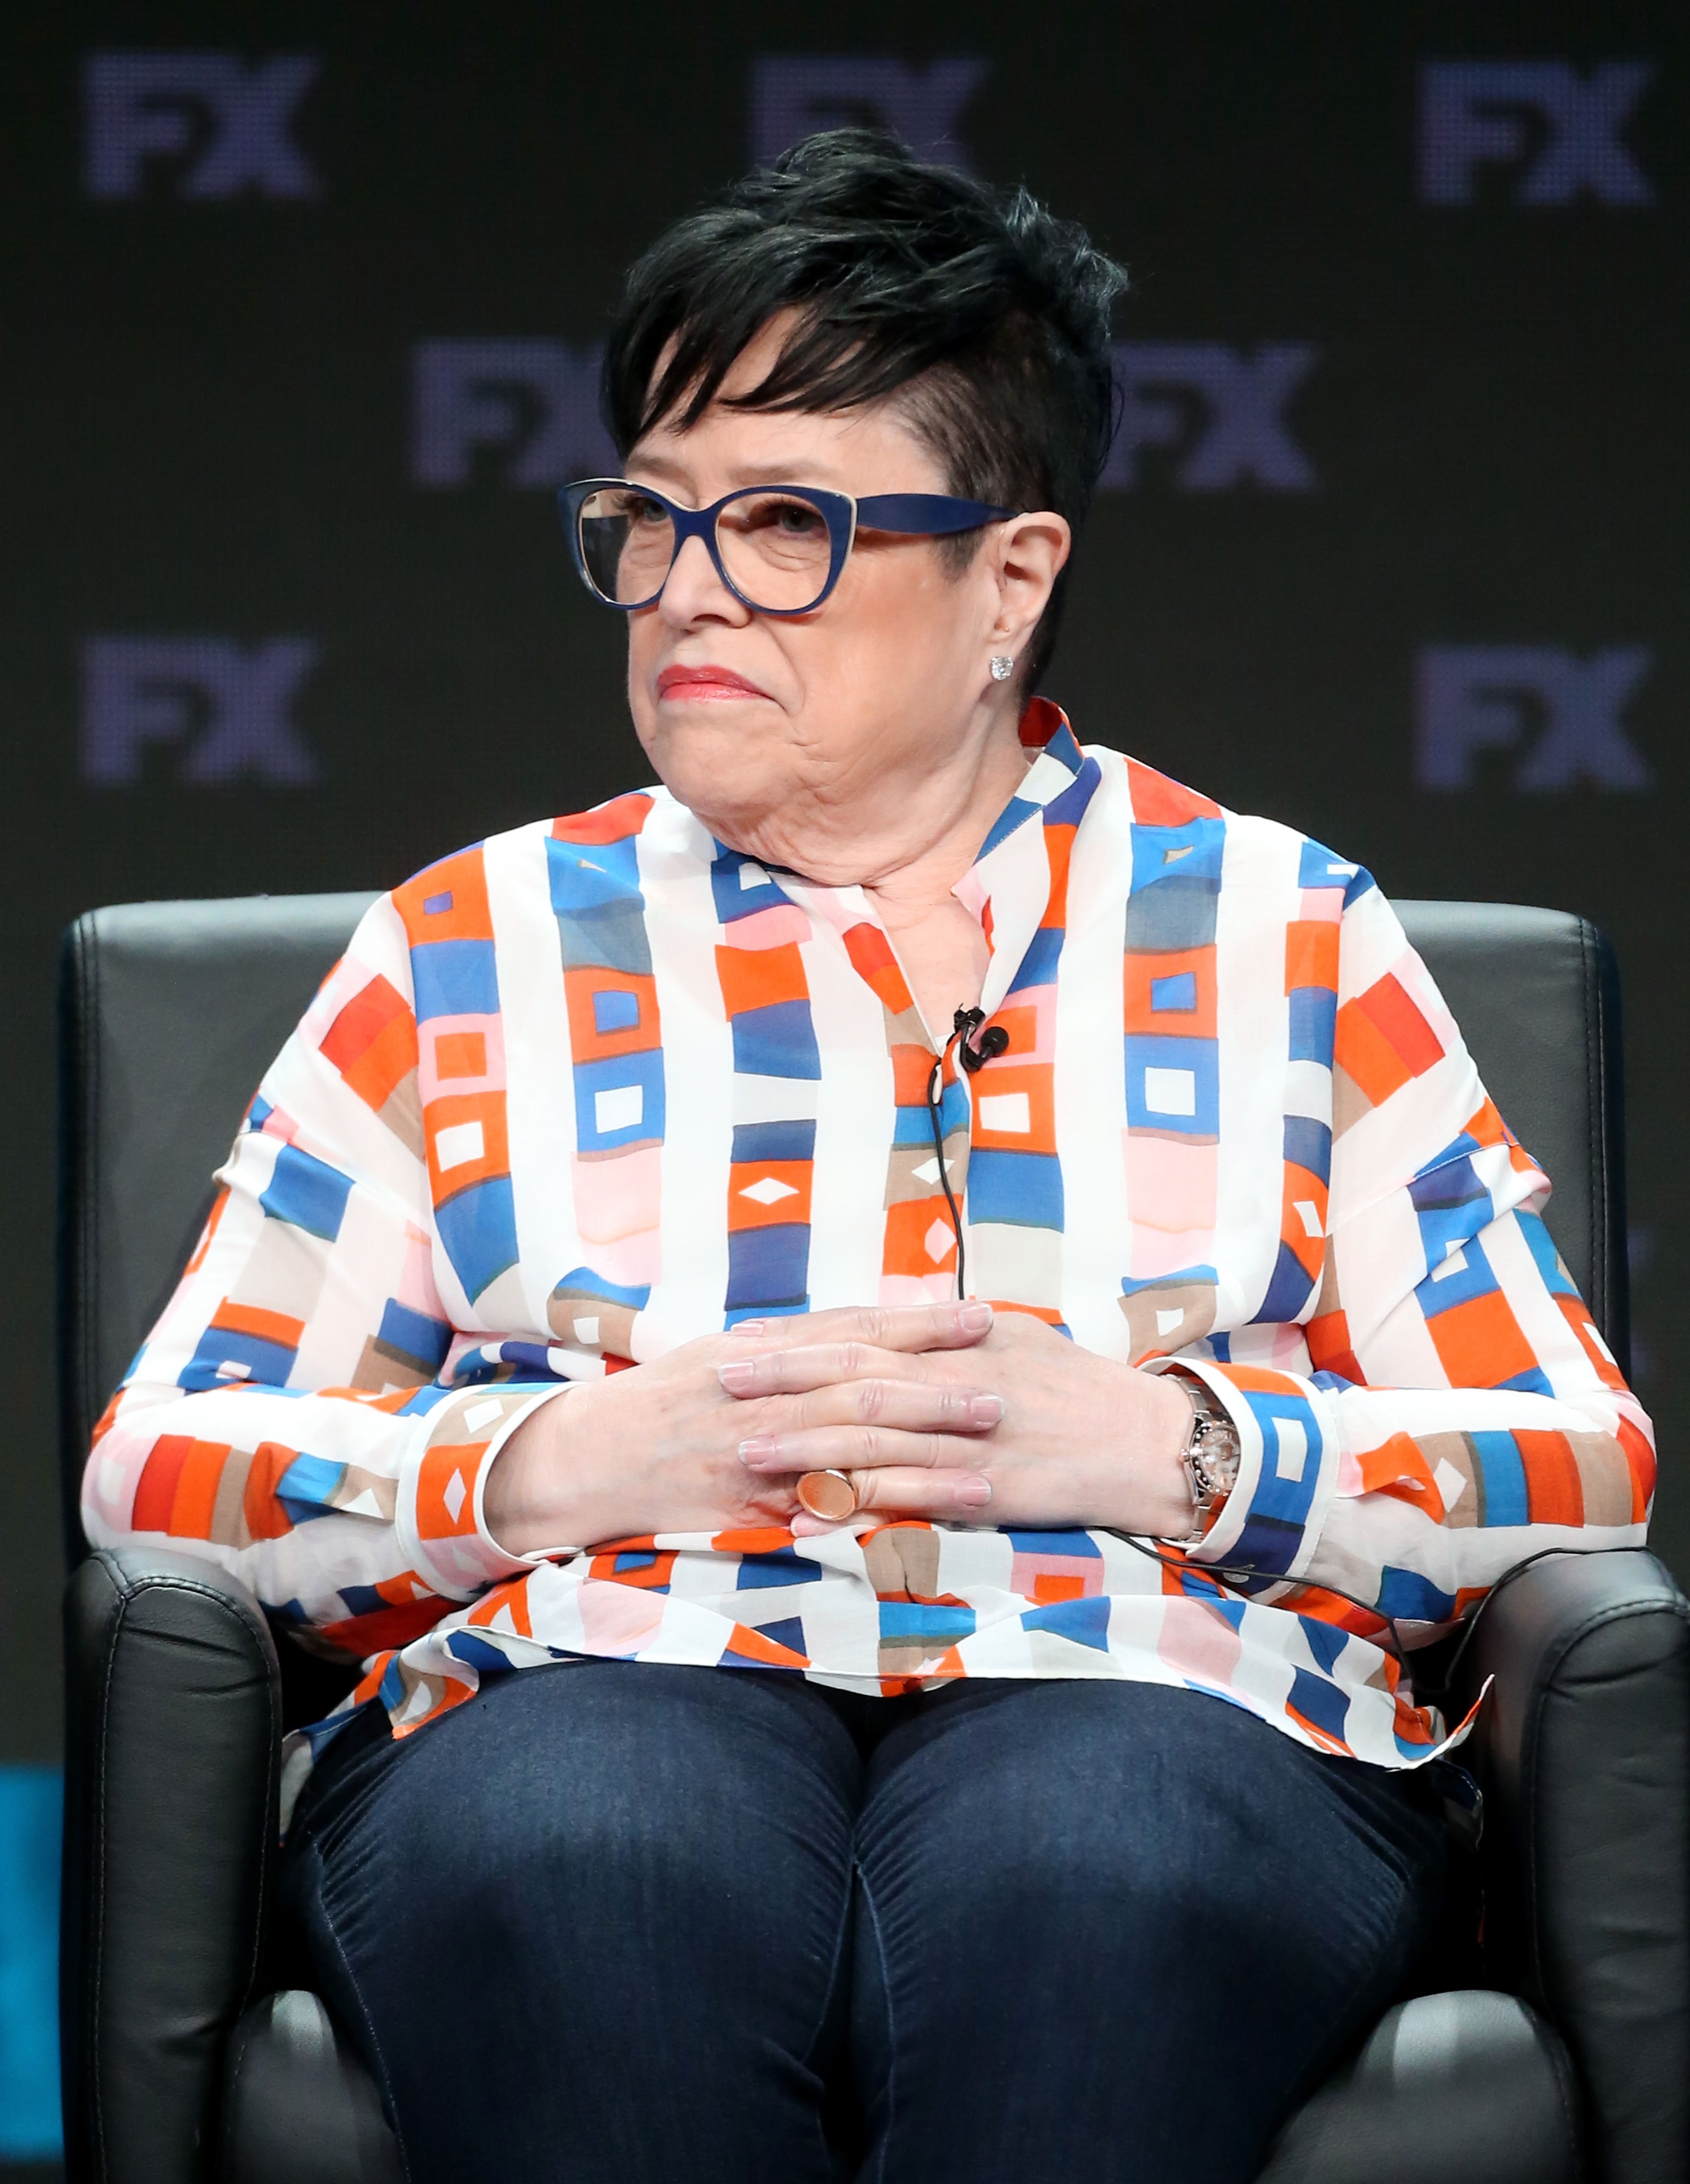 Kathy Bates at the "American Horror Story: Apocalypse" panel during the Summer TCA Press Tour on August 3, 2018, in Beverly Hills, California. | Source: Frederick M. Brown/Getty Images